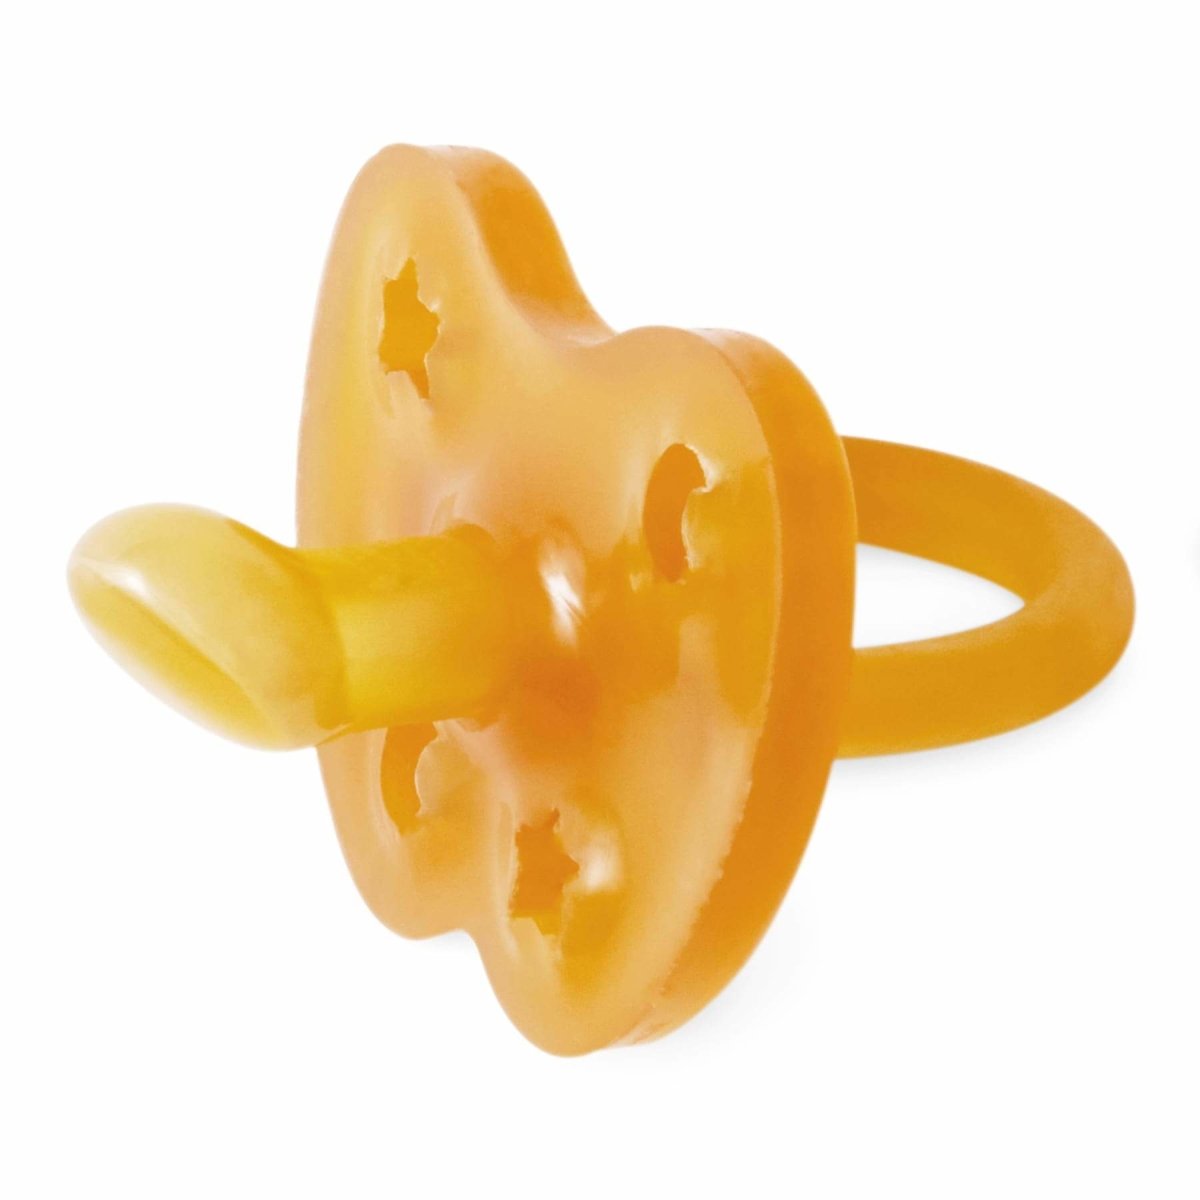 Natural Rubber Pacifier - Classic | Hevea | Baby Essentials - Bee Like Kids